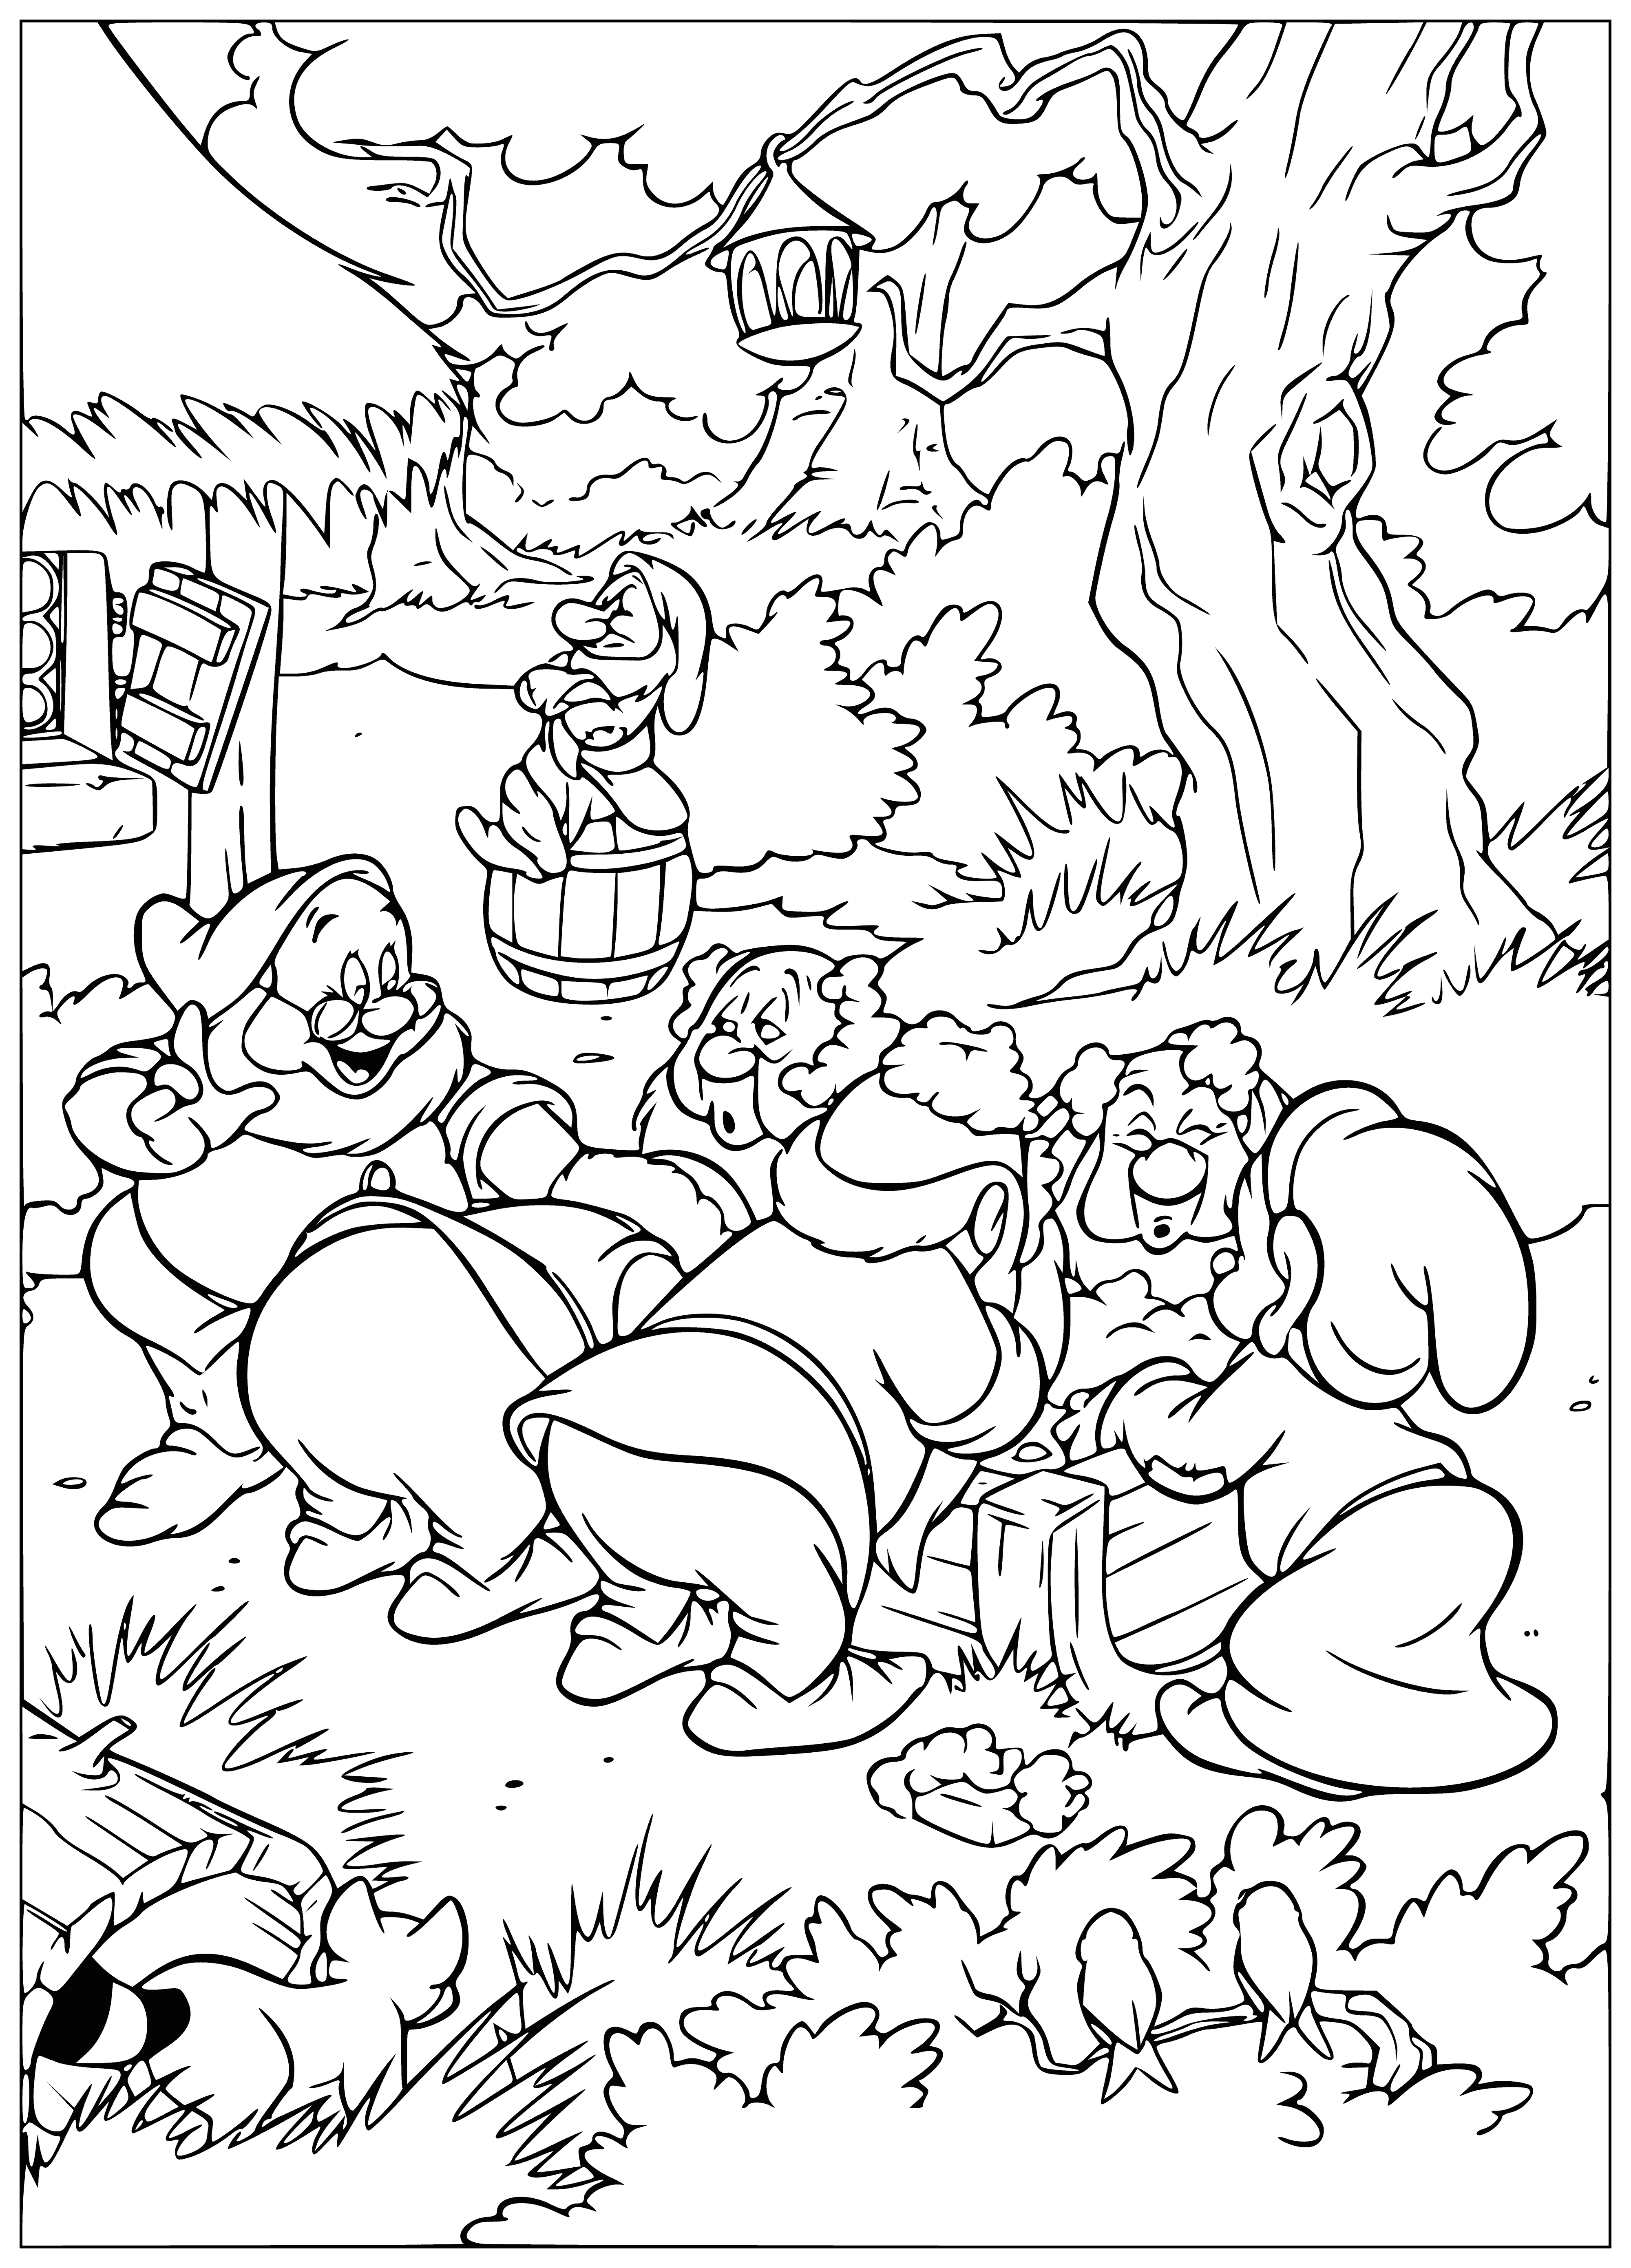 coloring page: 7 men around a basin of soapy water scrubbing w/bare hands. Fire burns, cauldron hangs. Their expressions reveal determination.